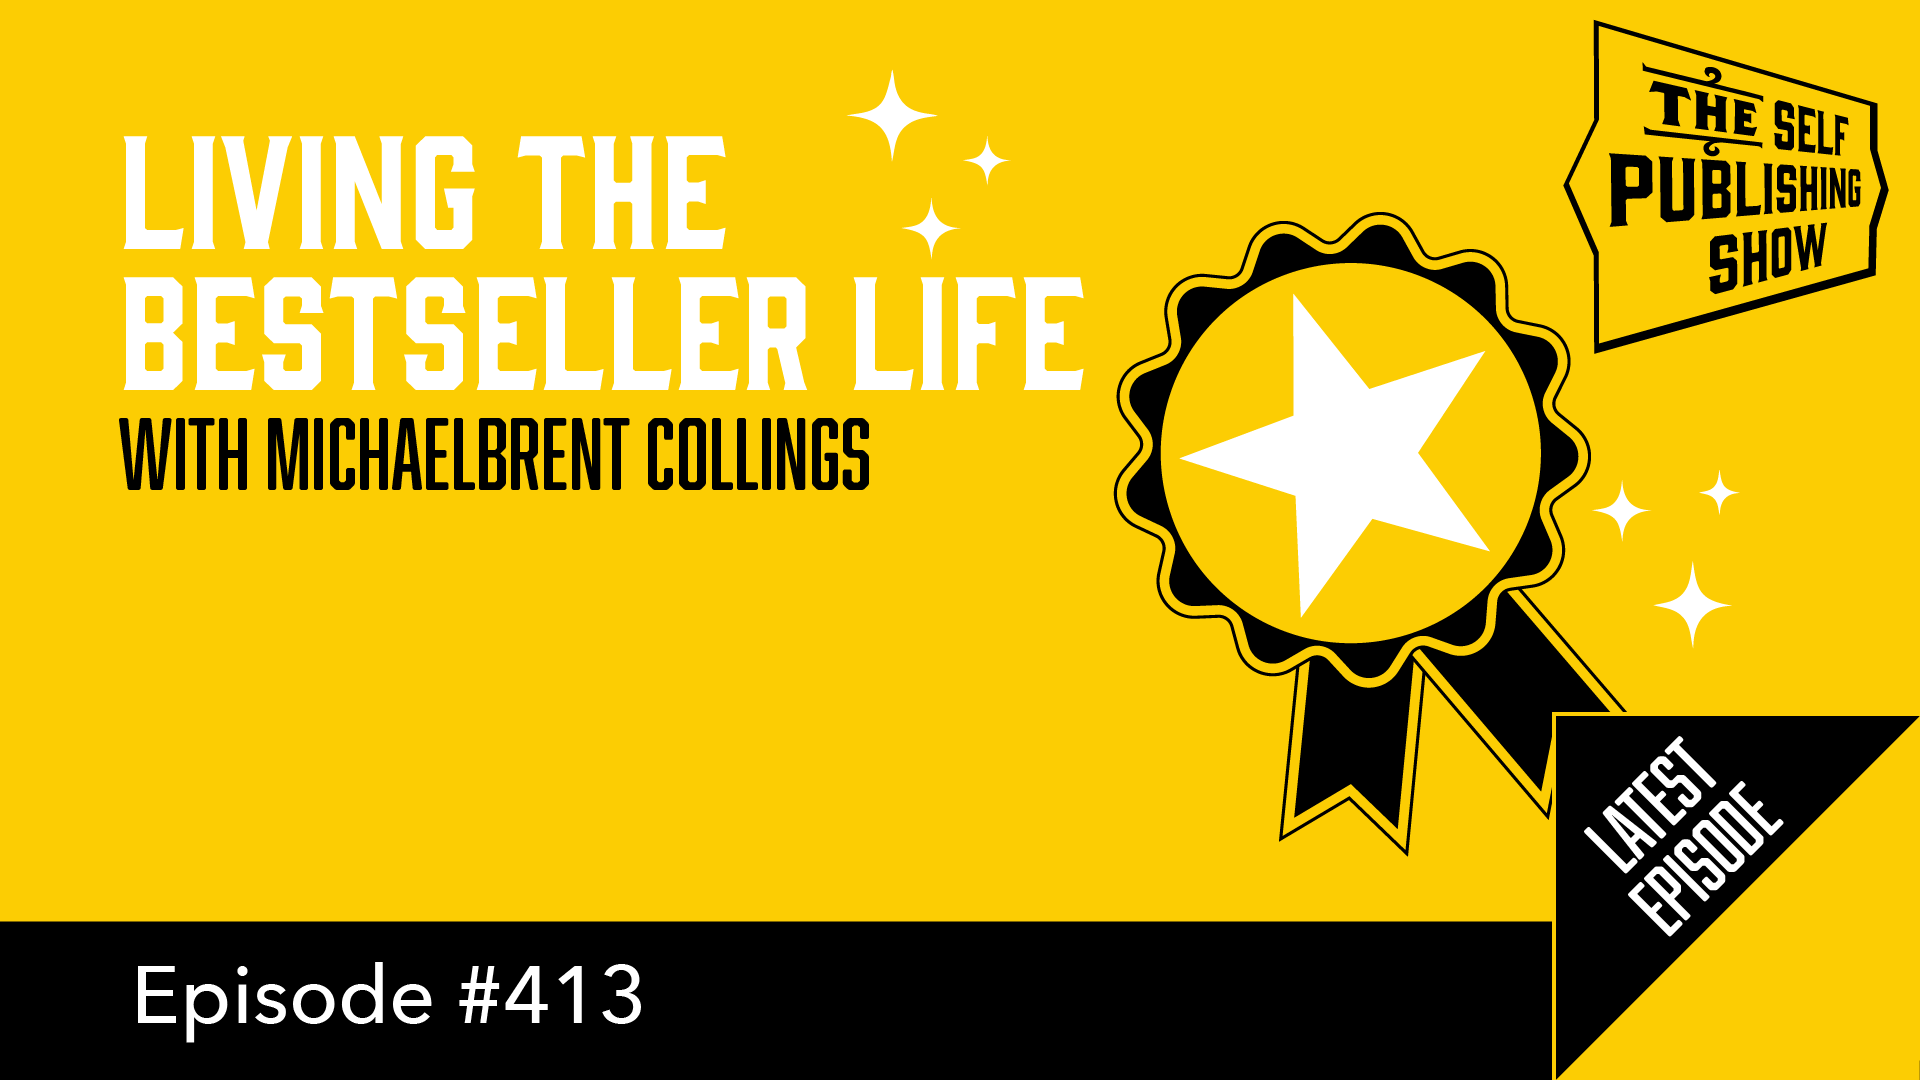 SPS-413: Living the Bestseller Life – with Michaelbrent Collings